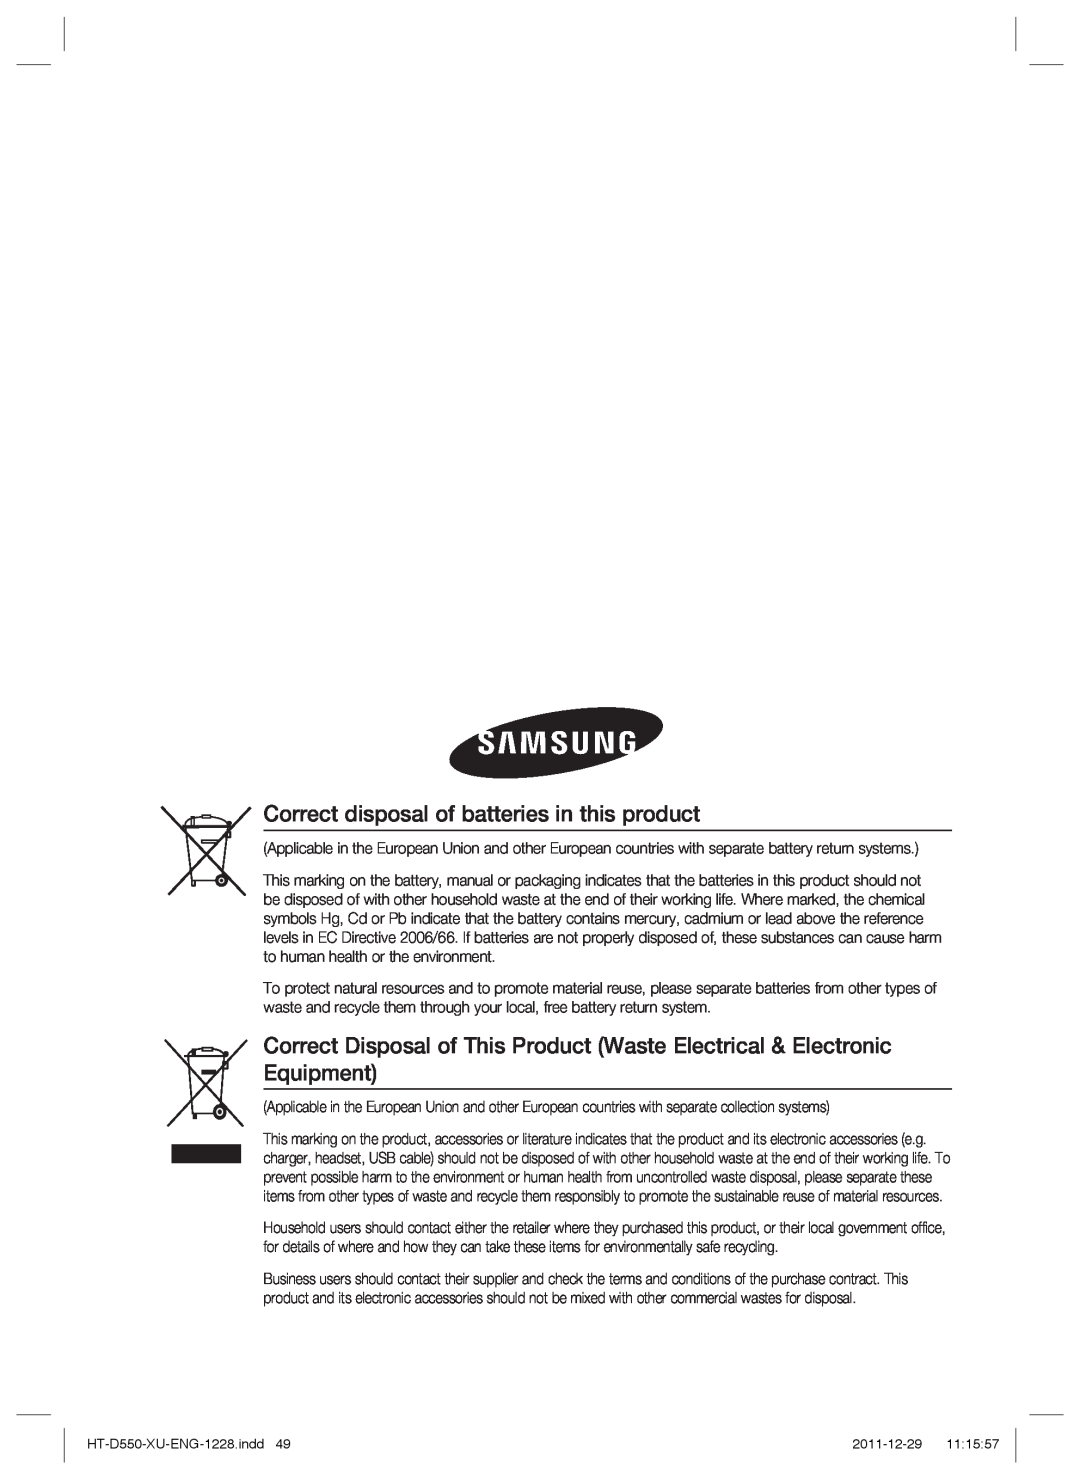 Samsung HT-D555WK/SQ, HT-D550/XN, HT-D555/TK, HT-D550/EN, HT-D555/EN, HT-D555/ZF Correct disposal of batteries in this product 